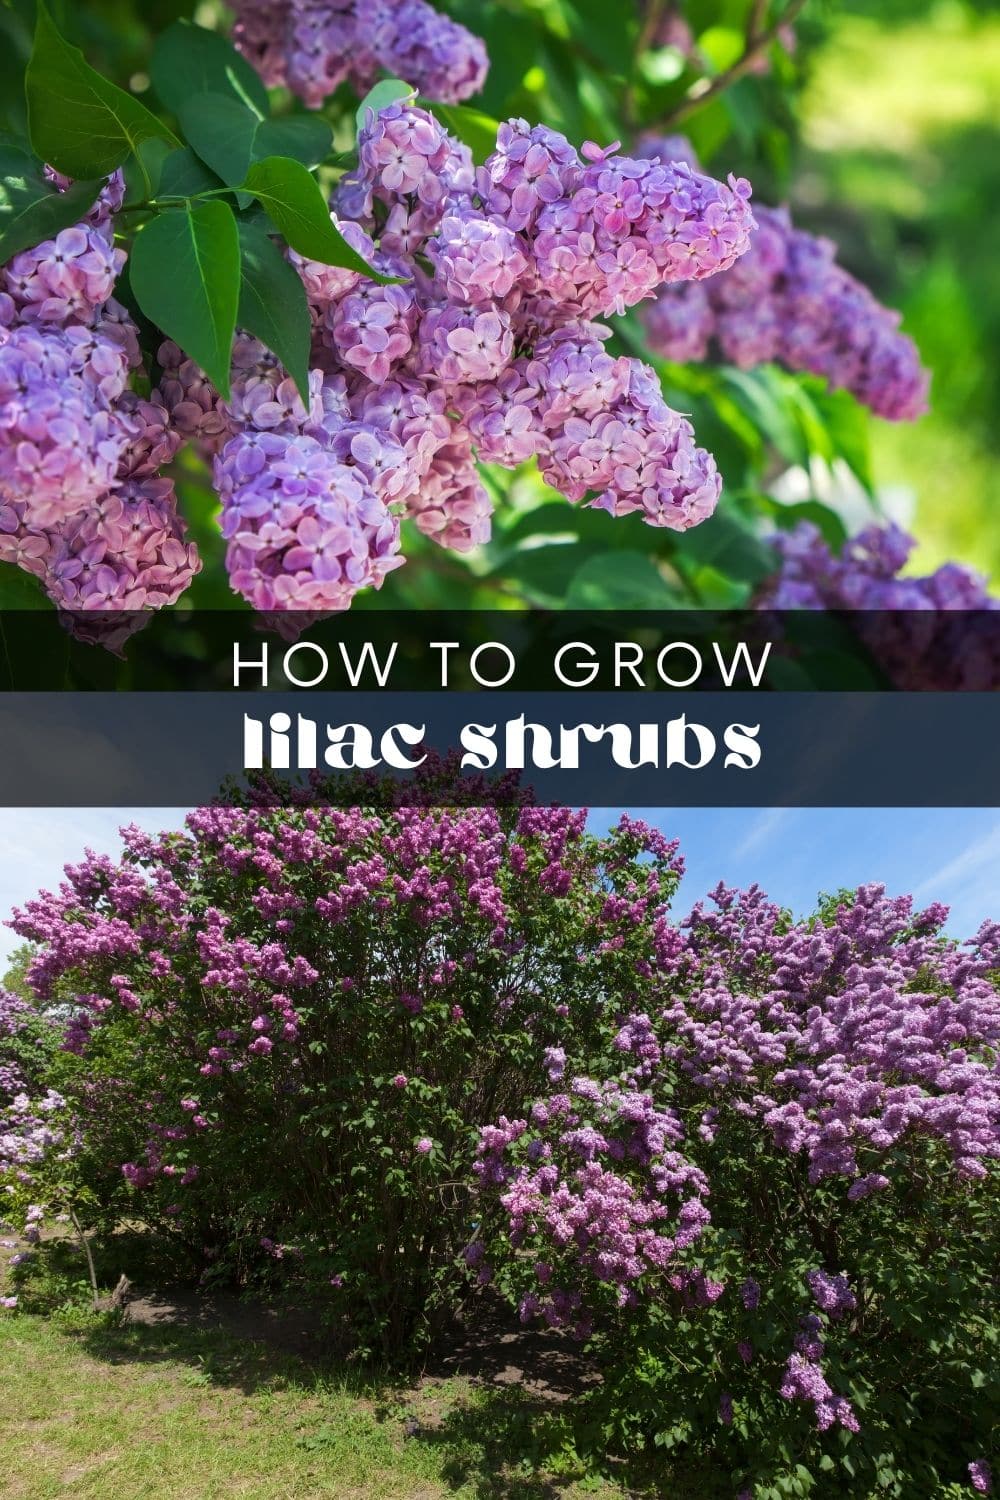 Finding plants that’ll thrive in your garden can be hard if you live in a cooler climate. However, one beautiful flower can handle the cold: lilacs. These sweet-smelling flowers are incredibly easy to care for and can add a touch of elegance to any garden!